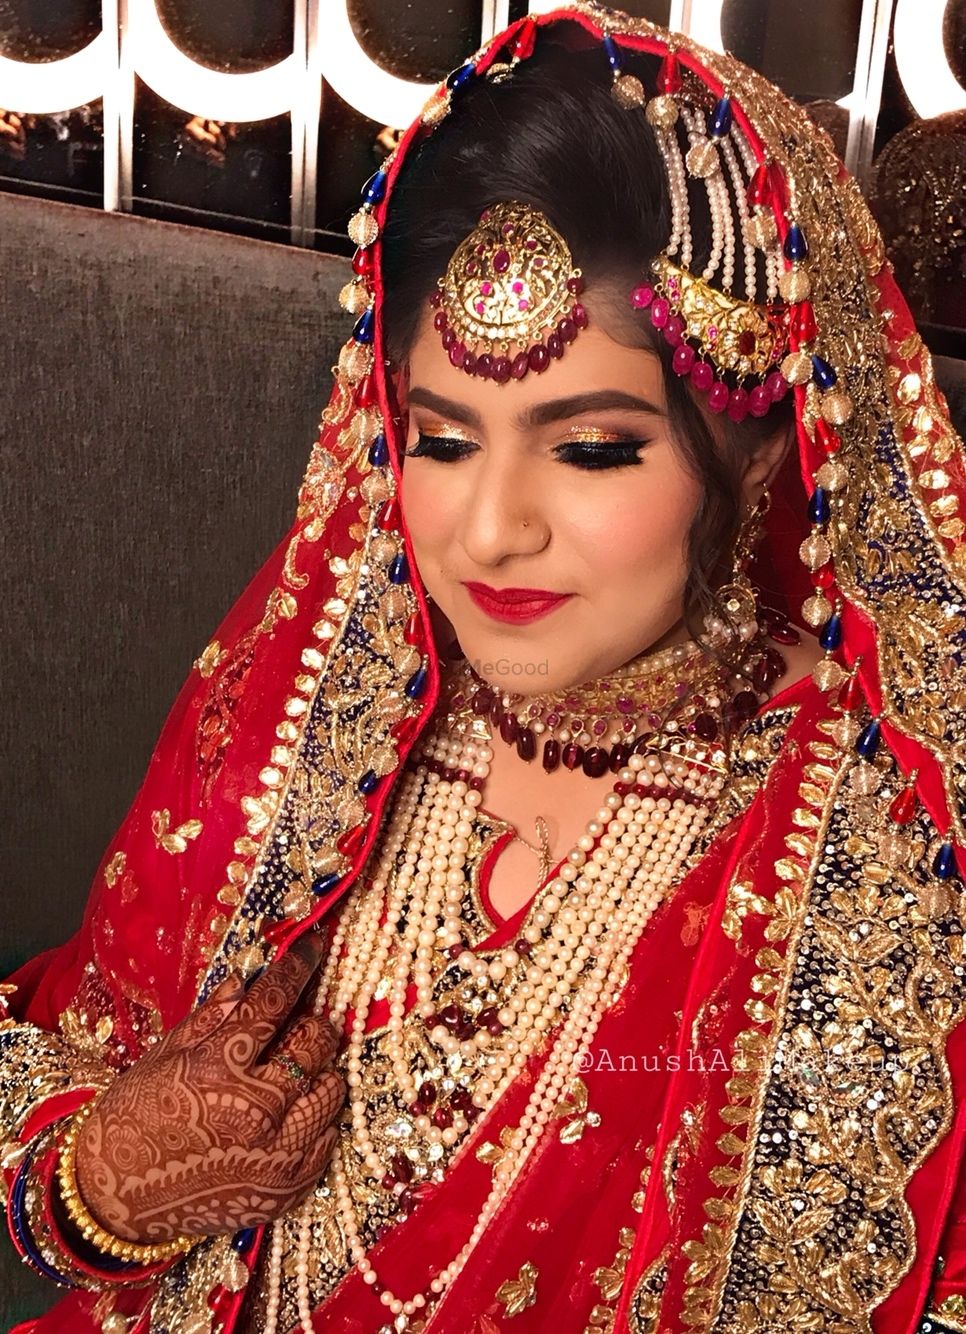 Photo From Muslim brides - By Anush Ali's Makeup Artistry